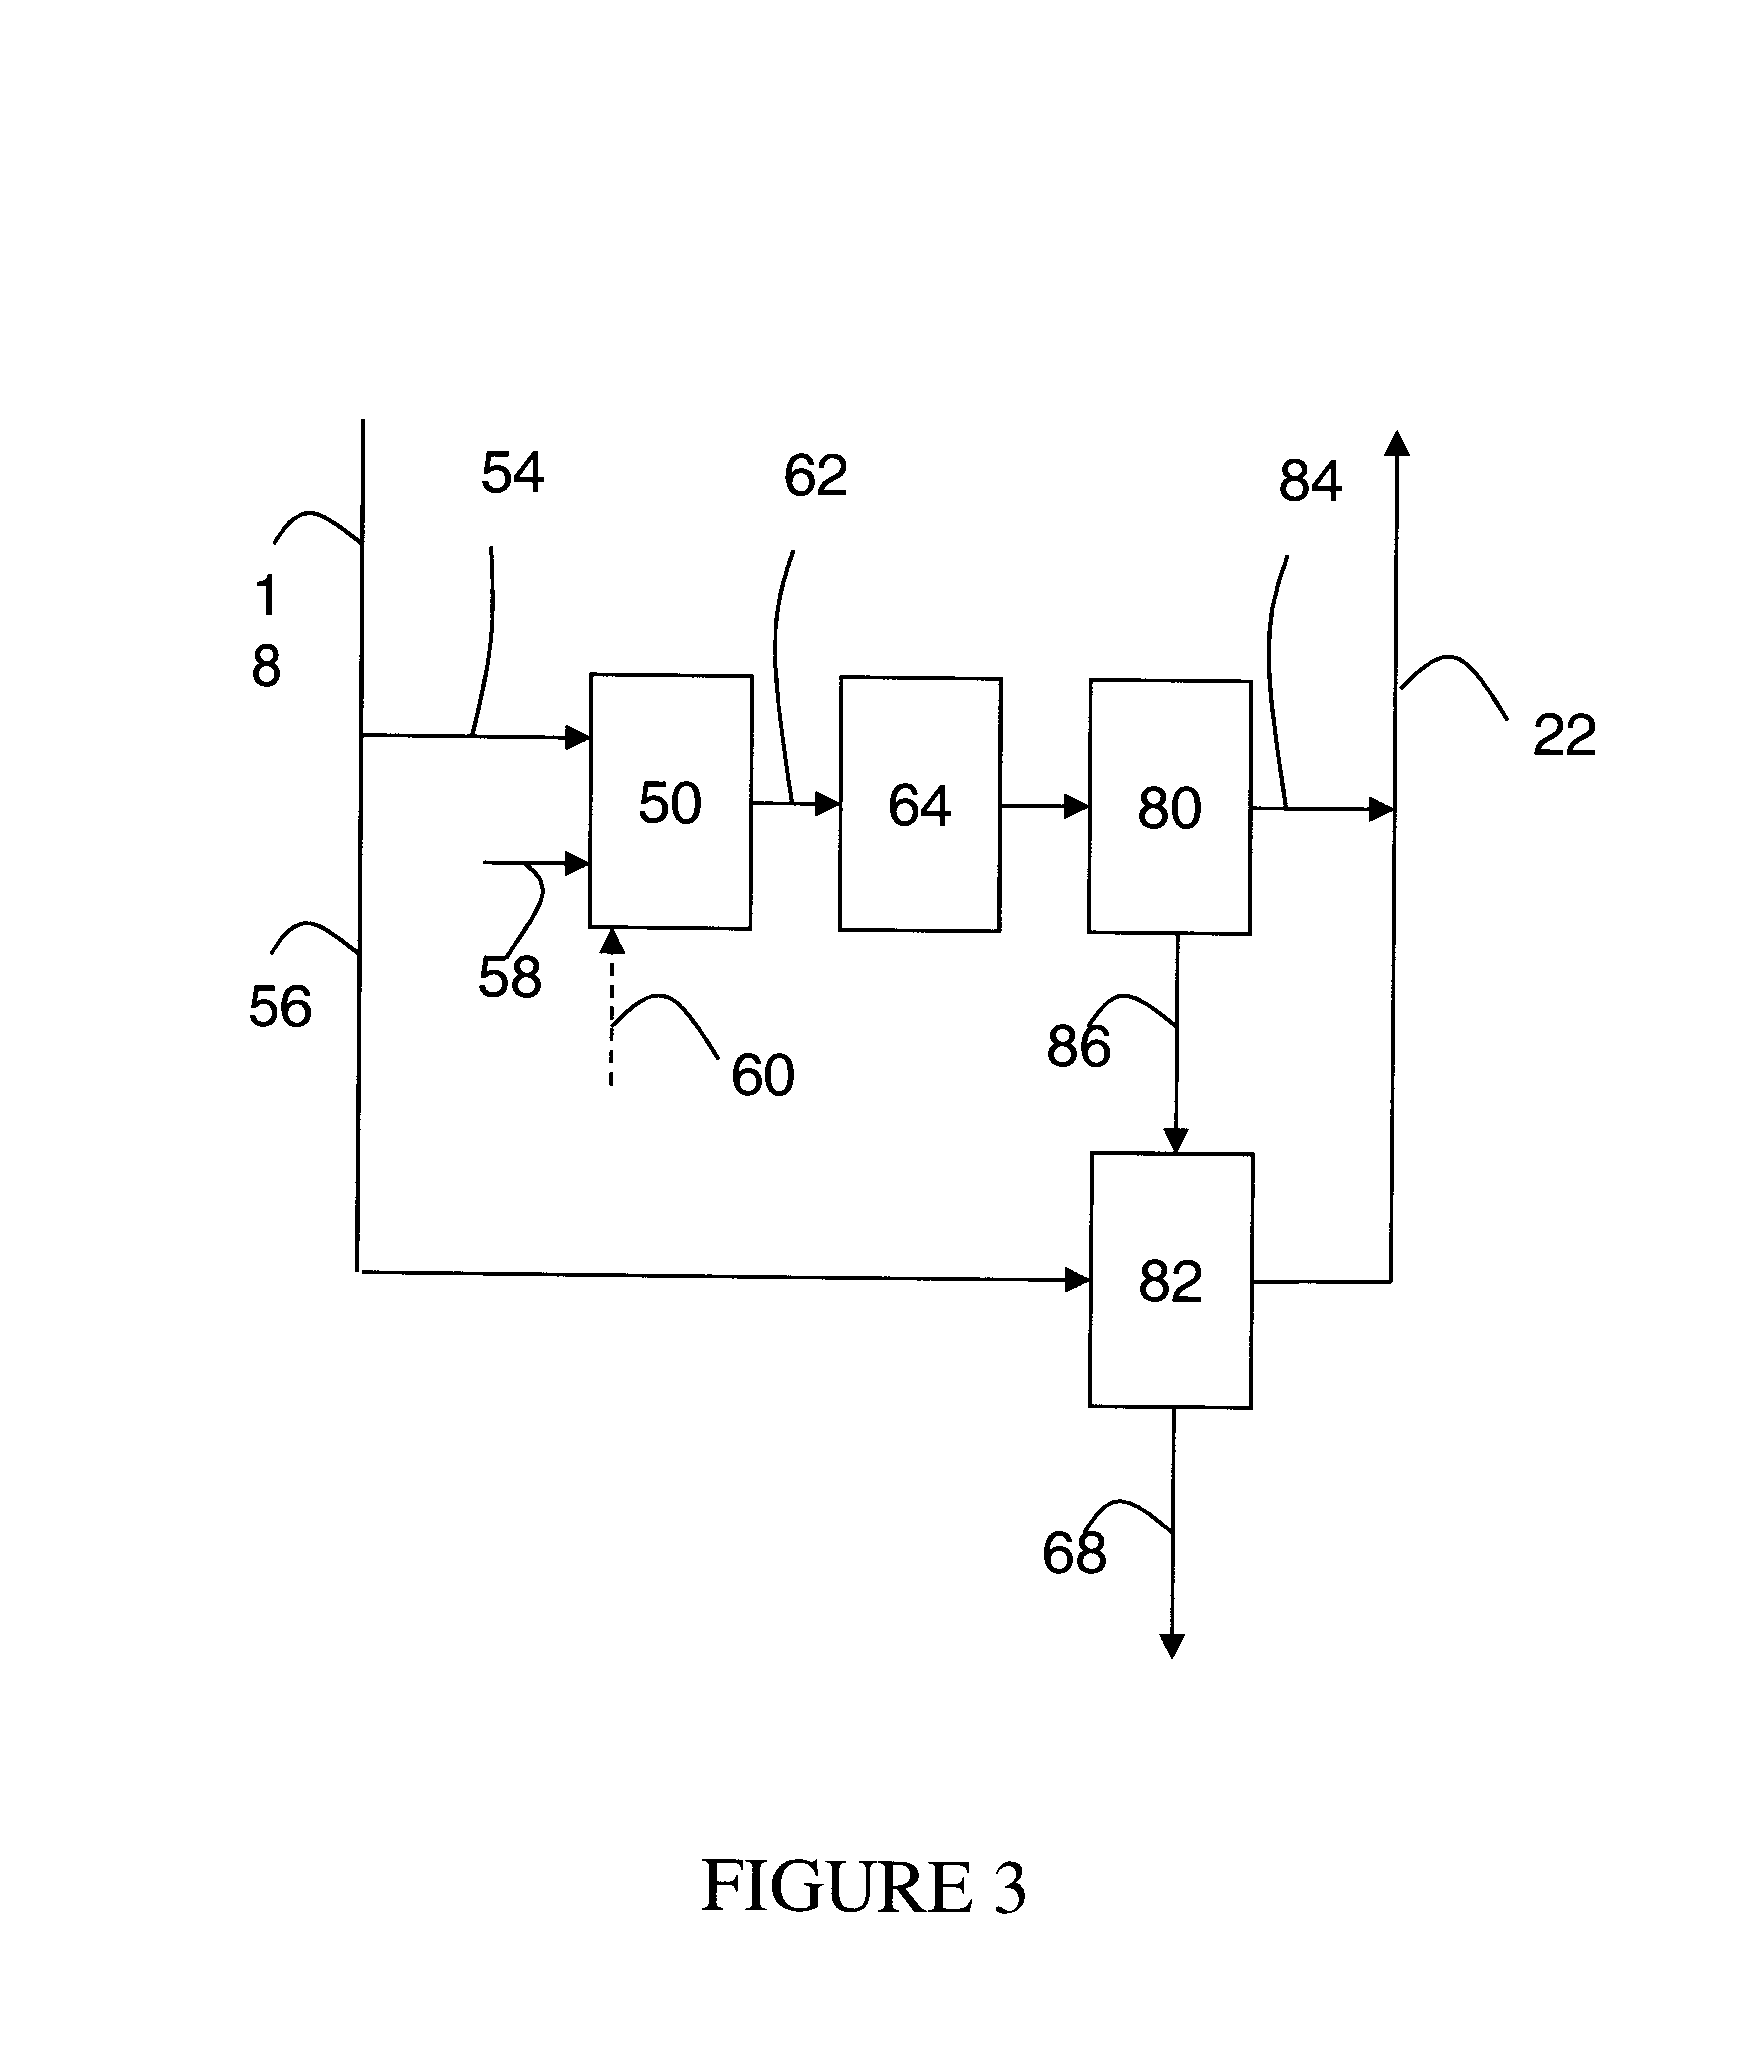 Method and Apparatus for Adjustably Treating a Sour Gas